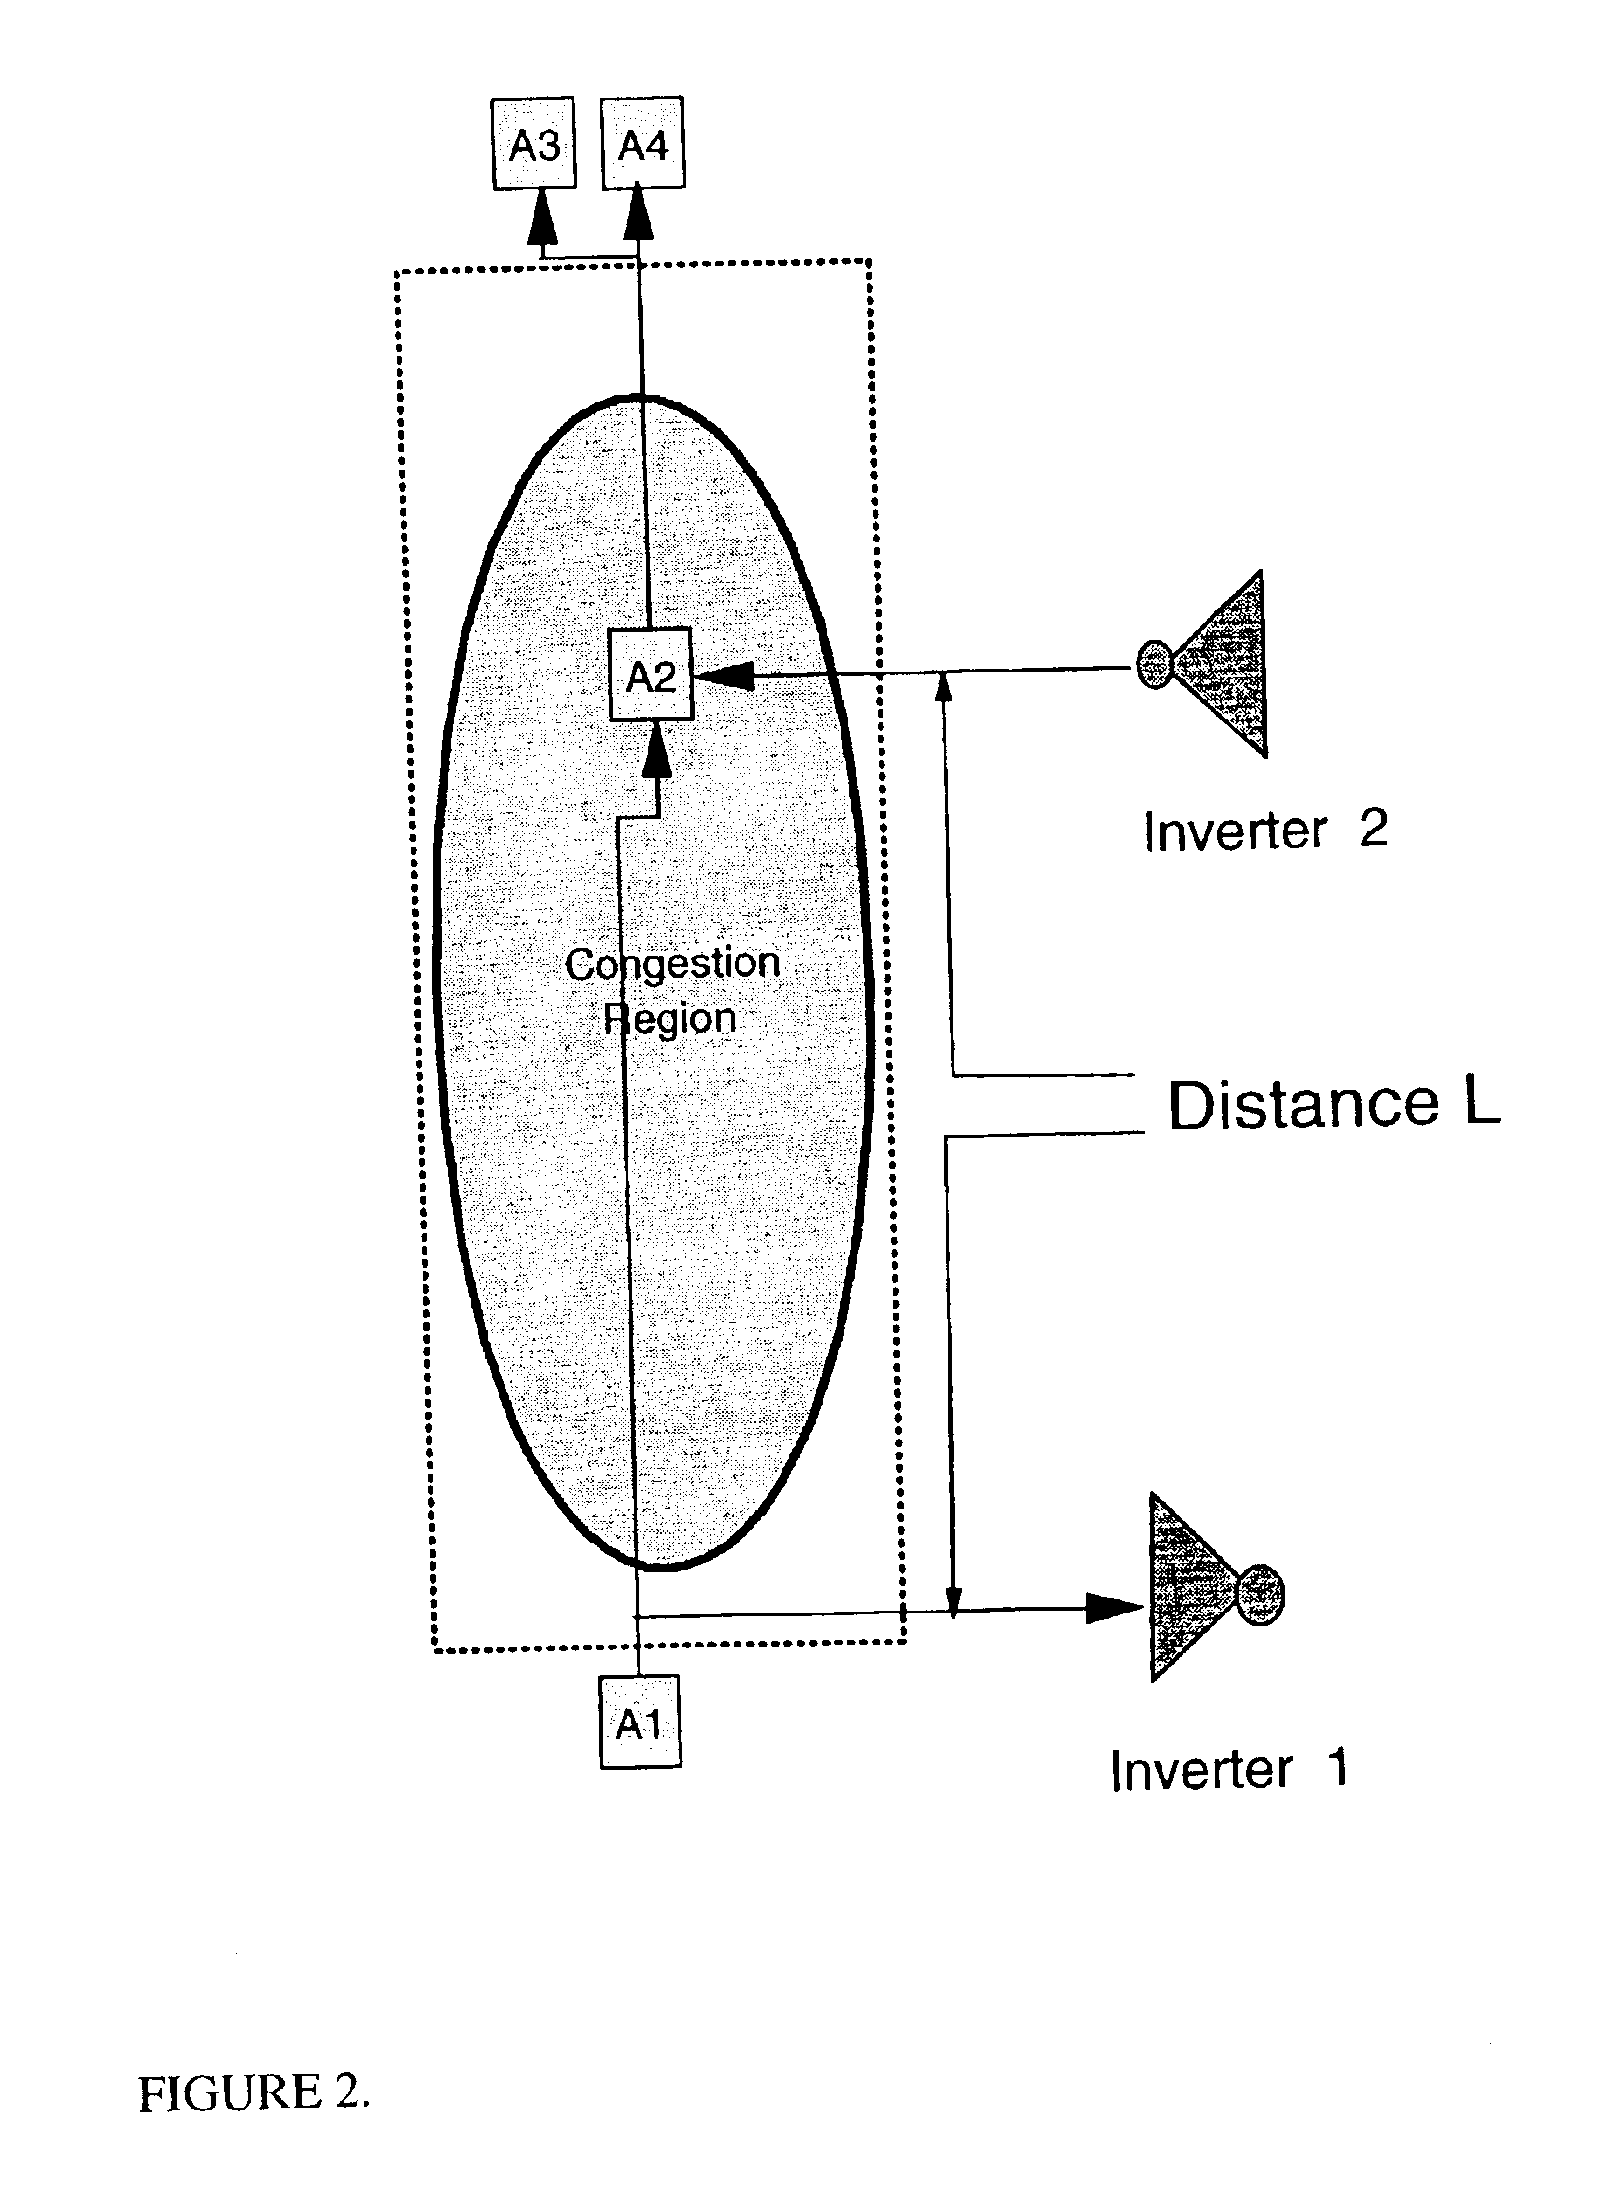 Method for identification and removal of non-timing critical wire routes from congestion region